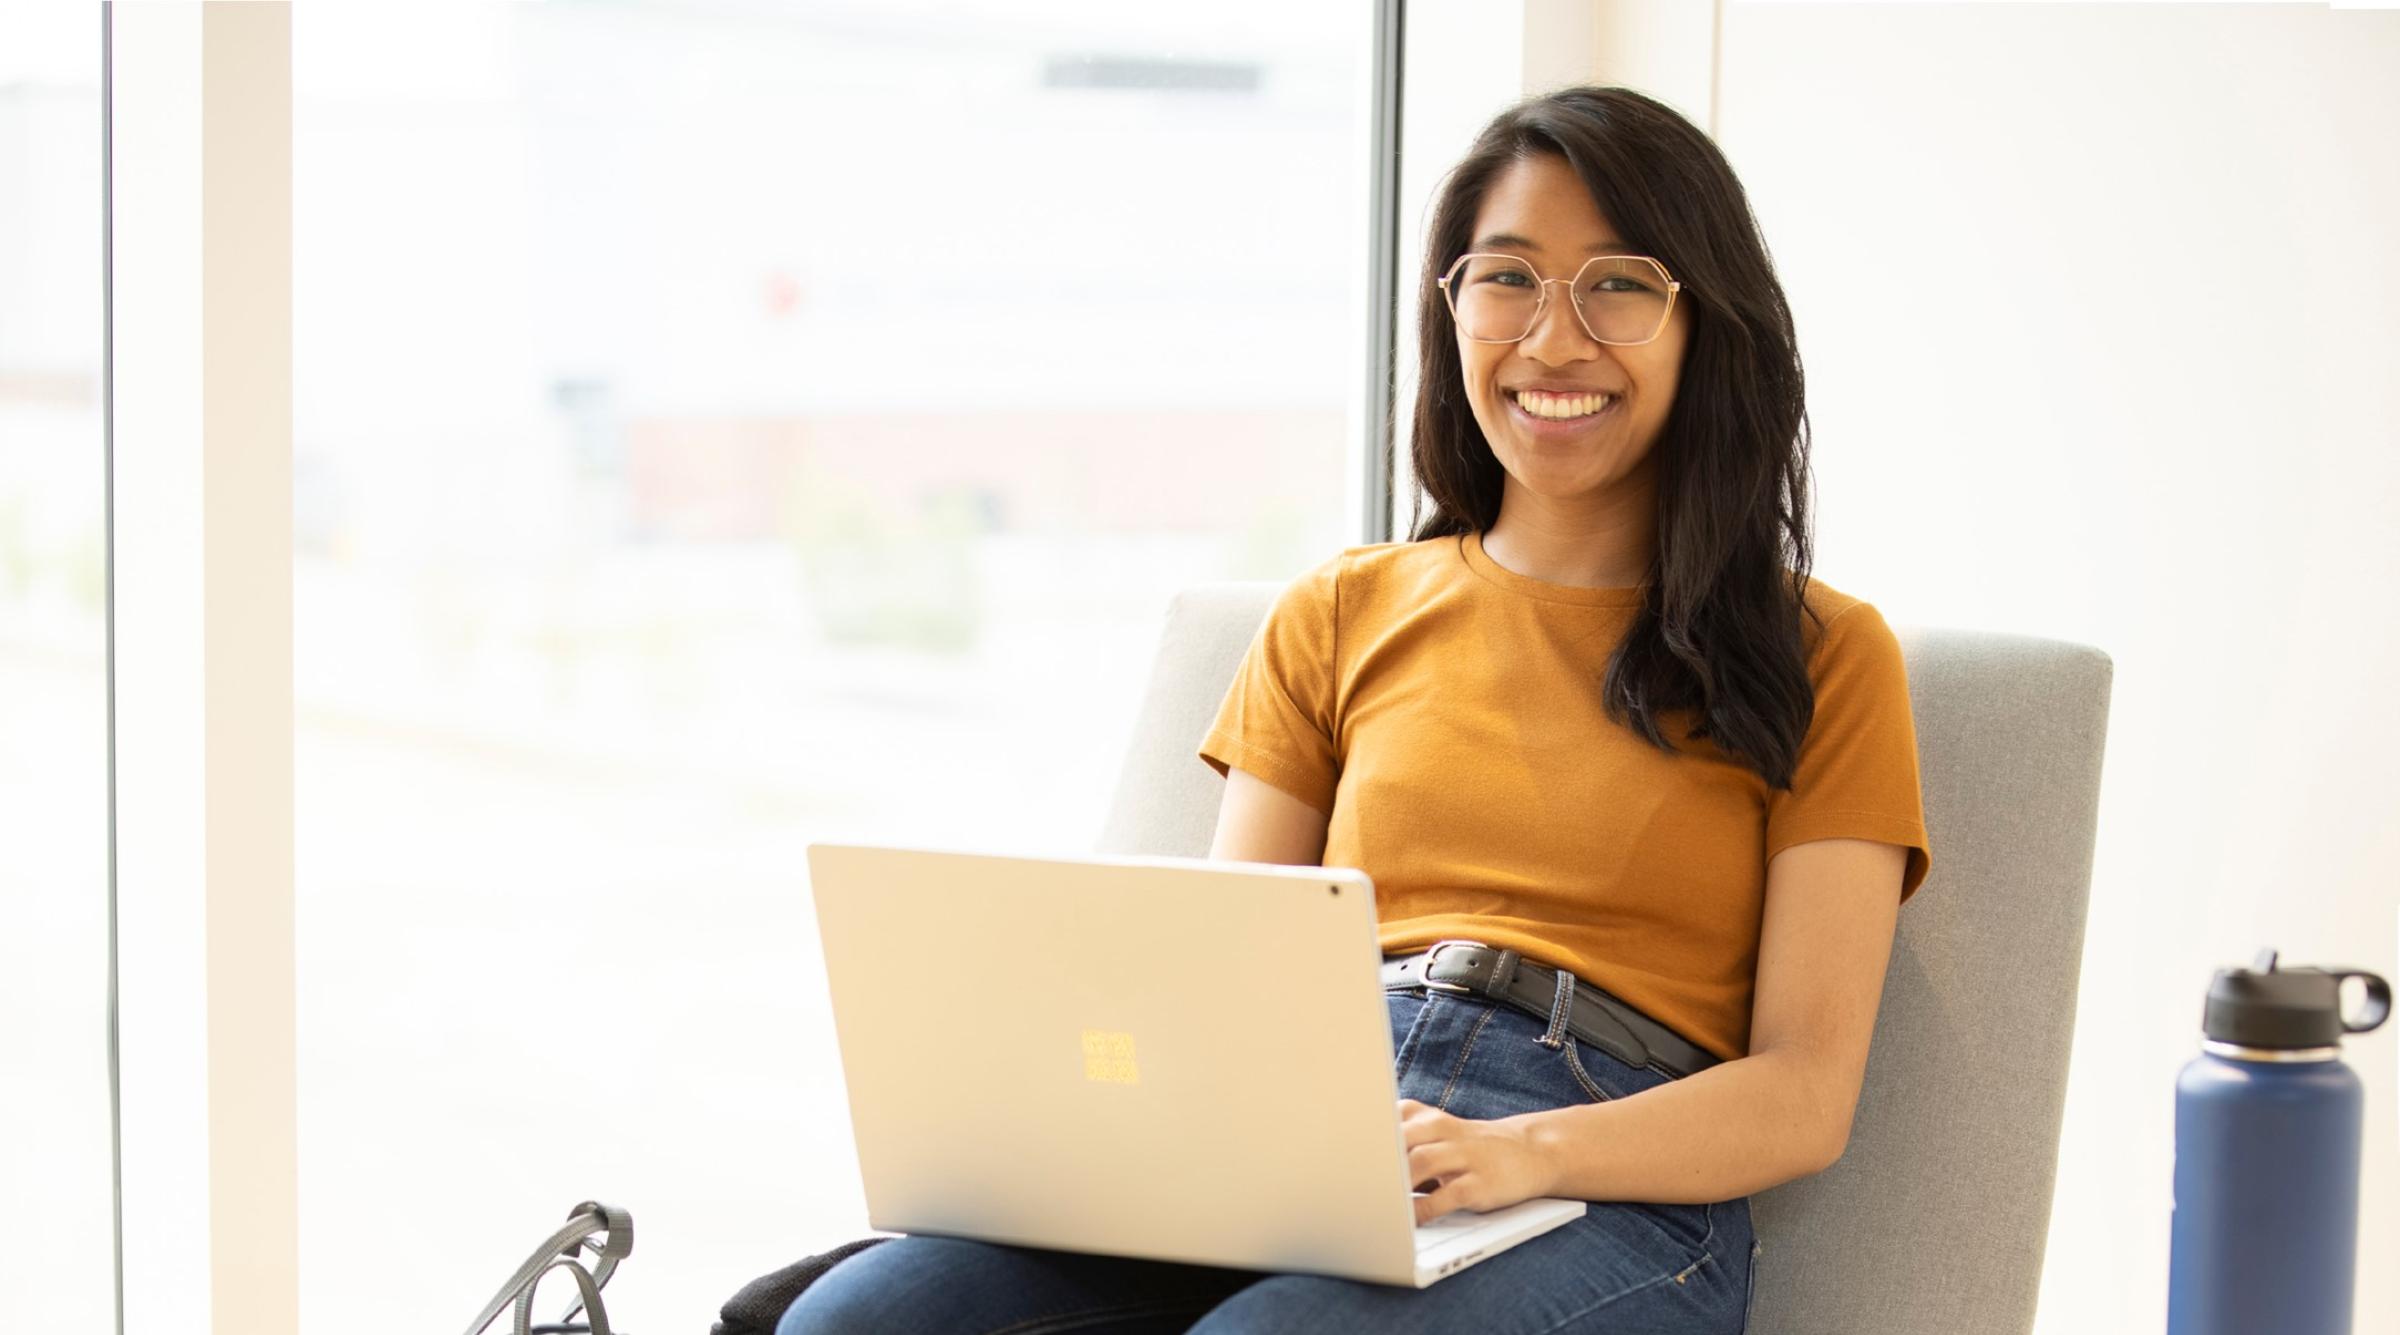 Smiling student sitting in a chair with a laptop on her lap in front of a bright window